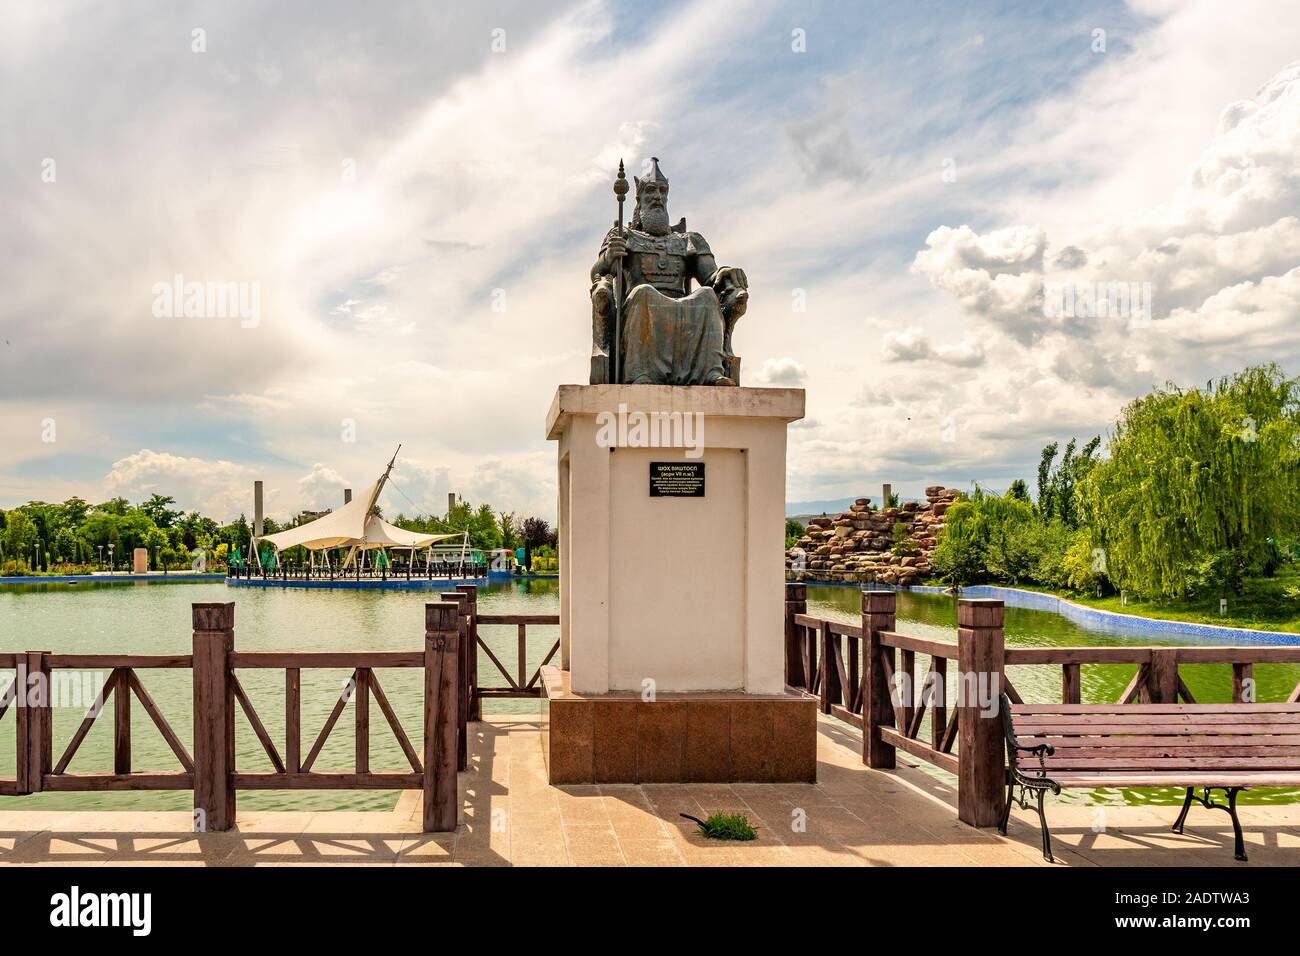 Dushanbe Flag Pole Park Lake Picturesque View of King Vishtaspa Statue on a Cloudy Blue Sky Day Stock Photo